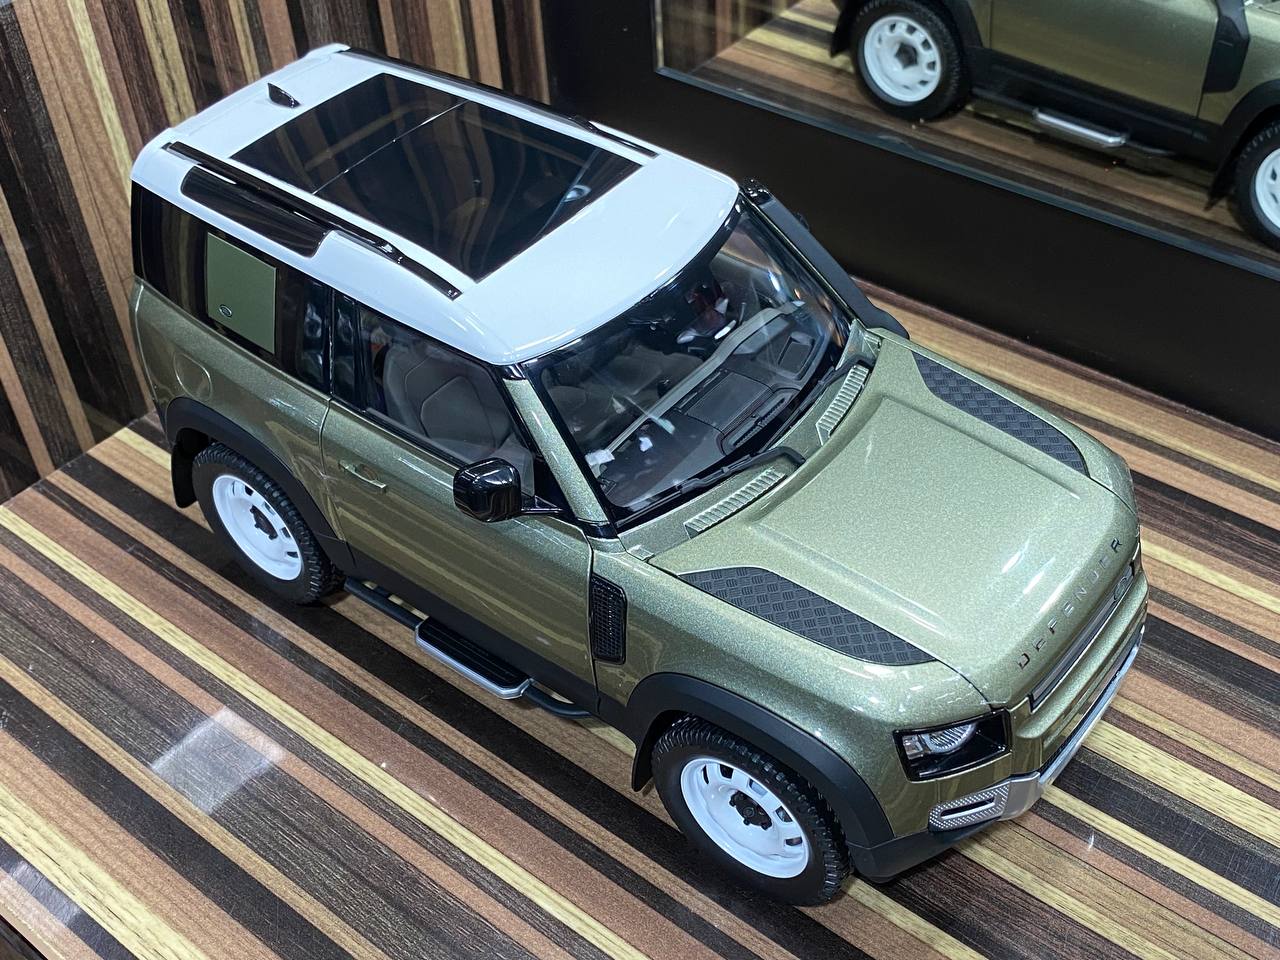 1/18 Diecast Land Rover Defender 90 Almost Real Scale Model Car